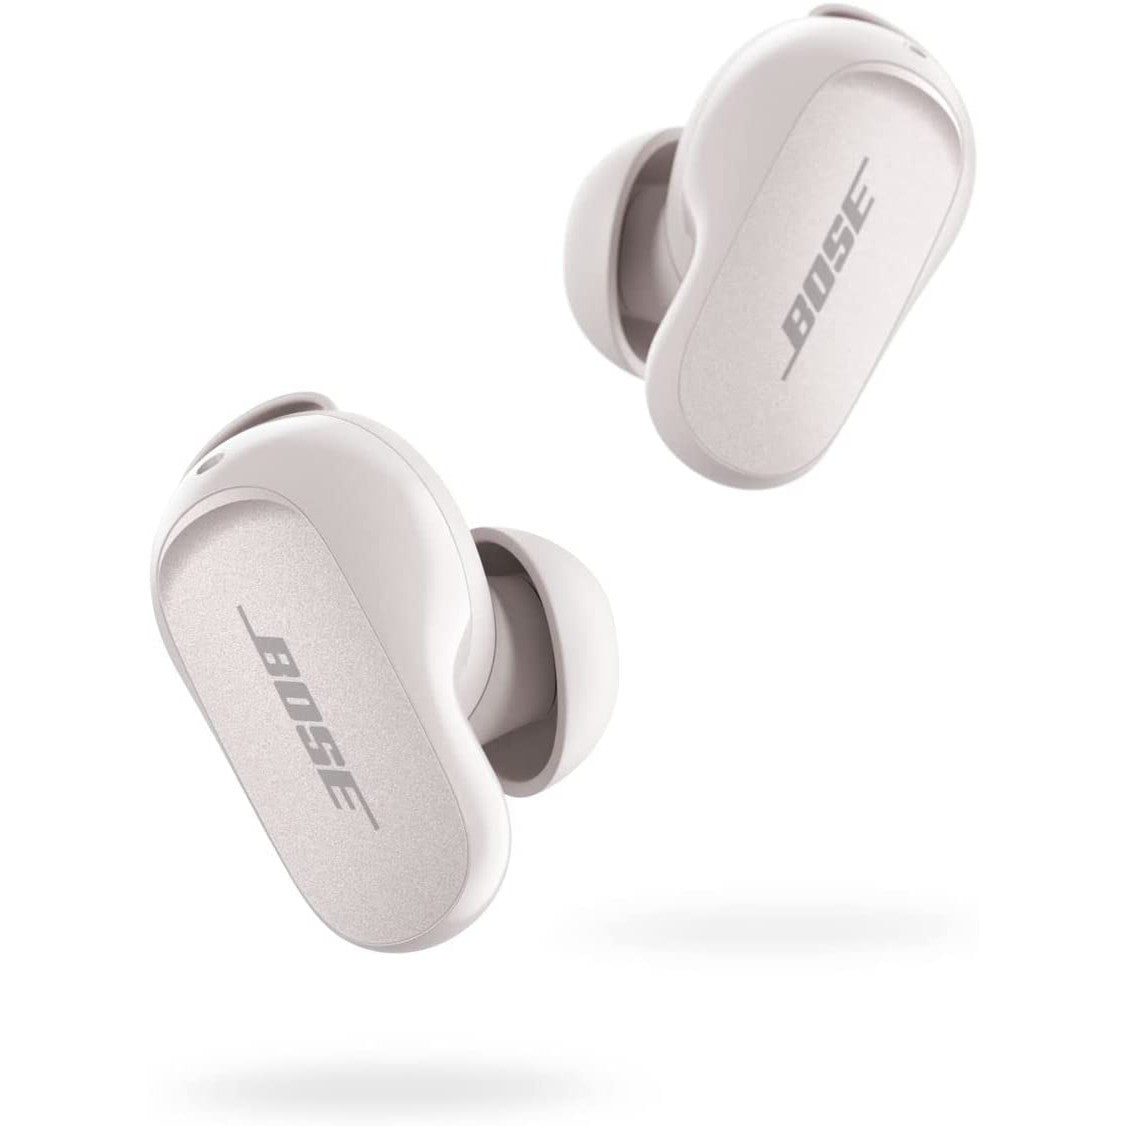 Bose QuietComfort II Wireless Noise-Cancelling Earbuds - White - Refurbished Good